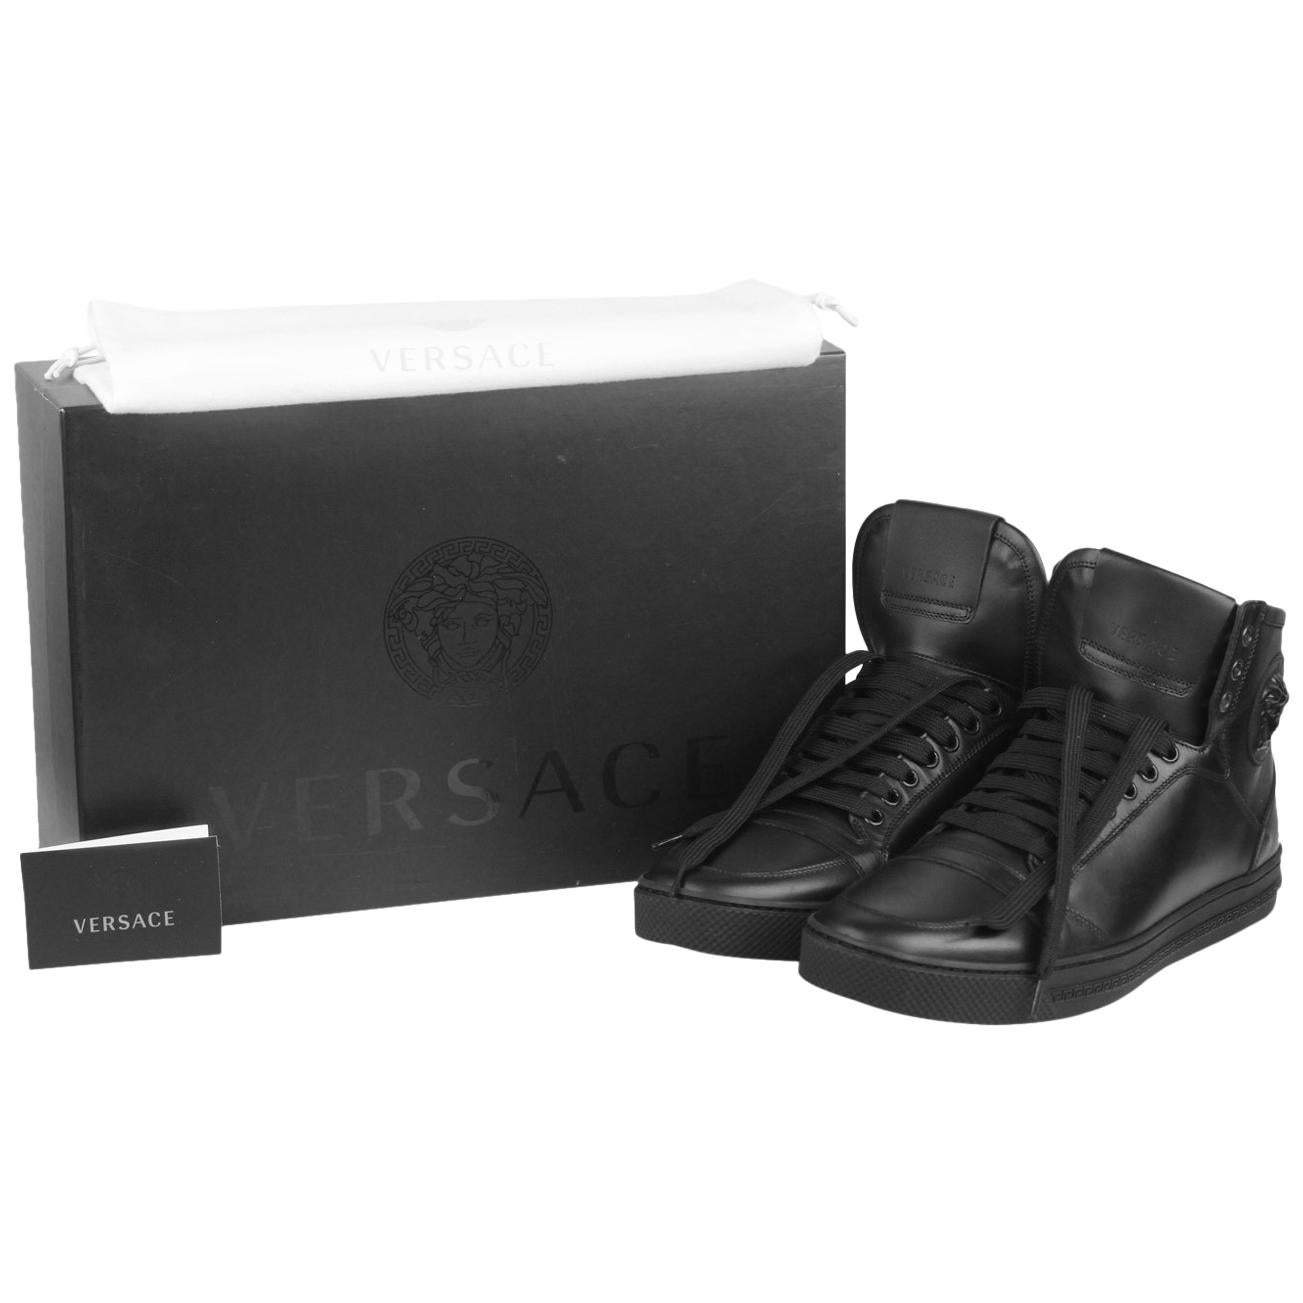 Versace Black Leather High Back Medusa Sneakers Shoes Size 43